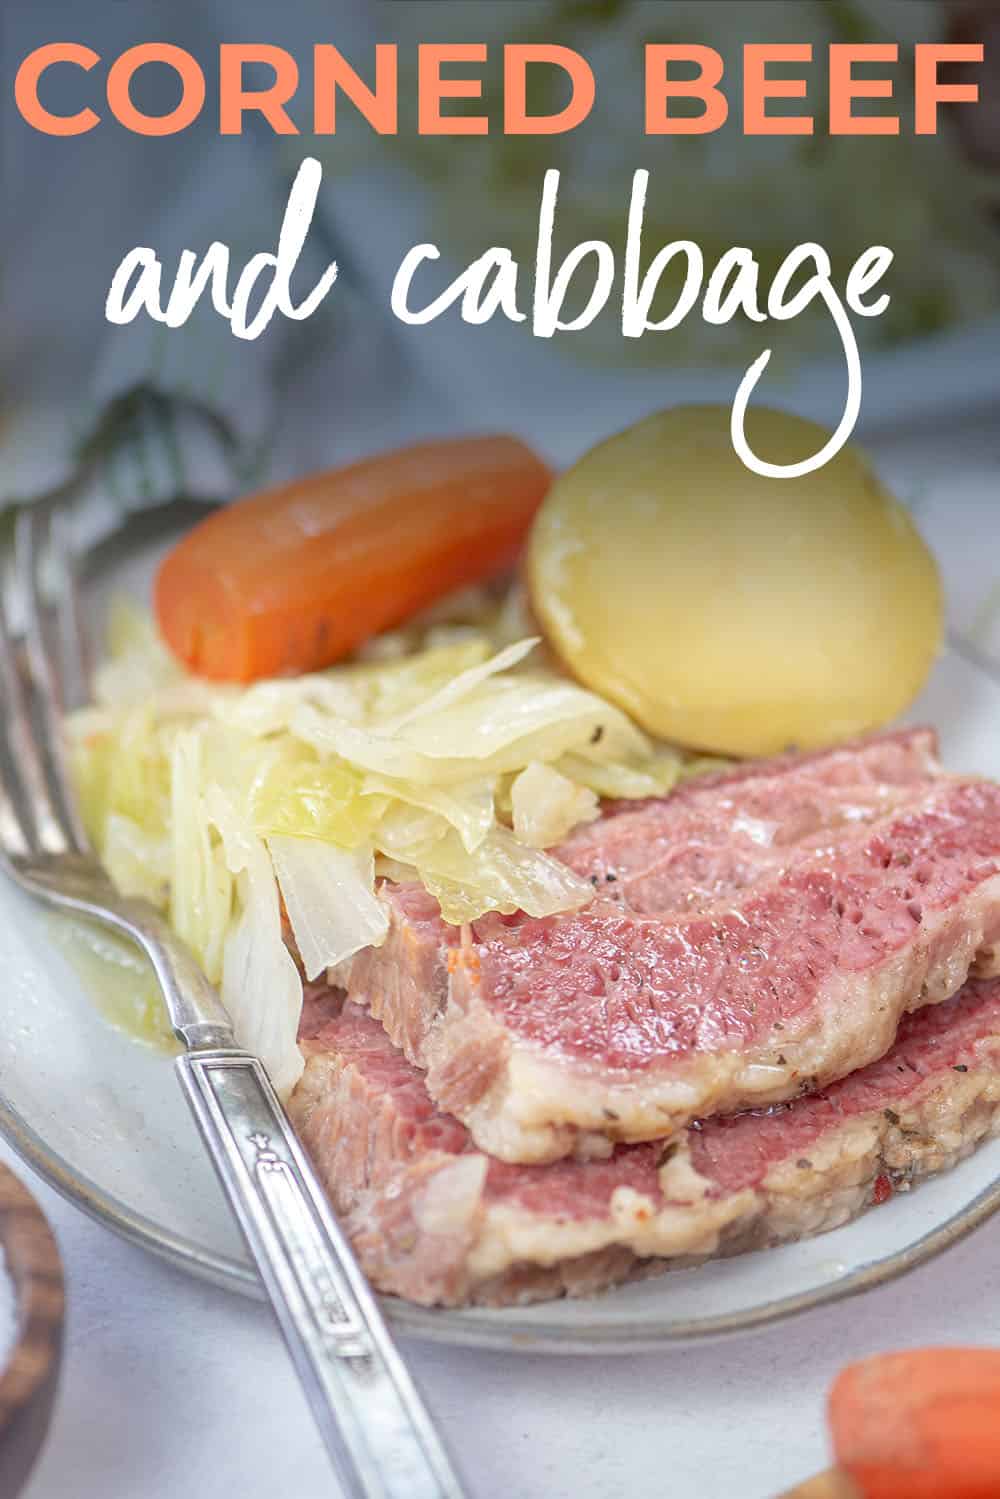 corned beef and cabbage on plate.